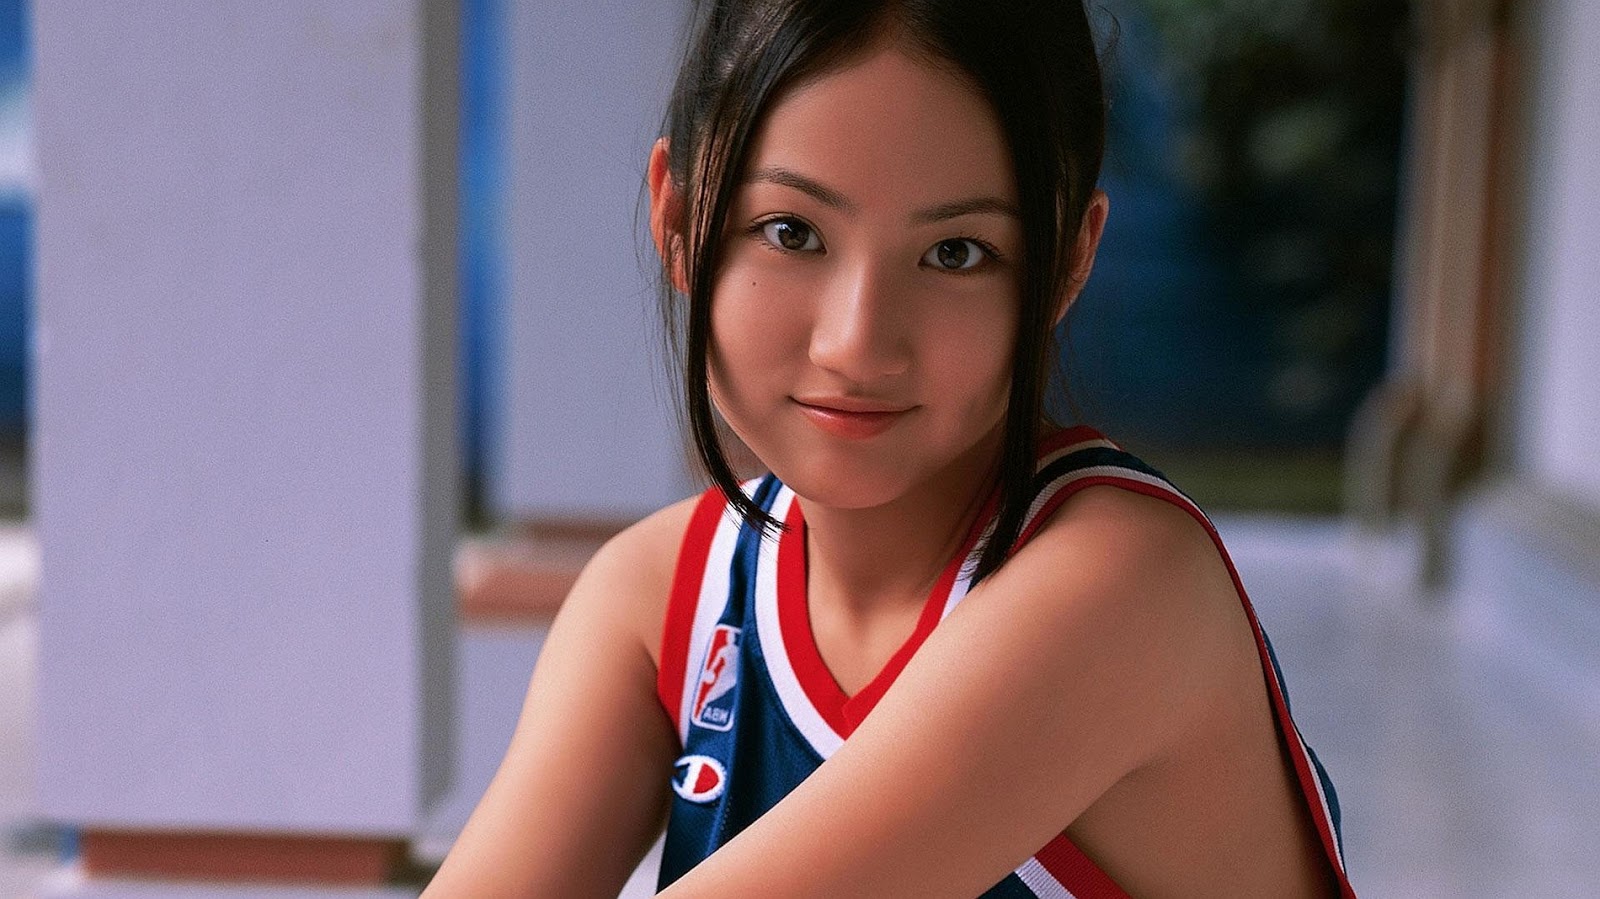 Tiny japanese cheerleader with baby images